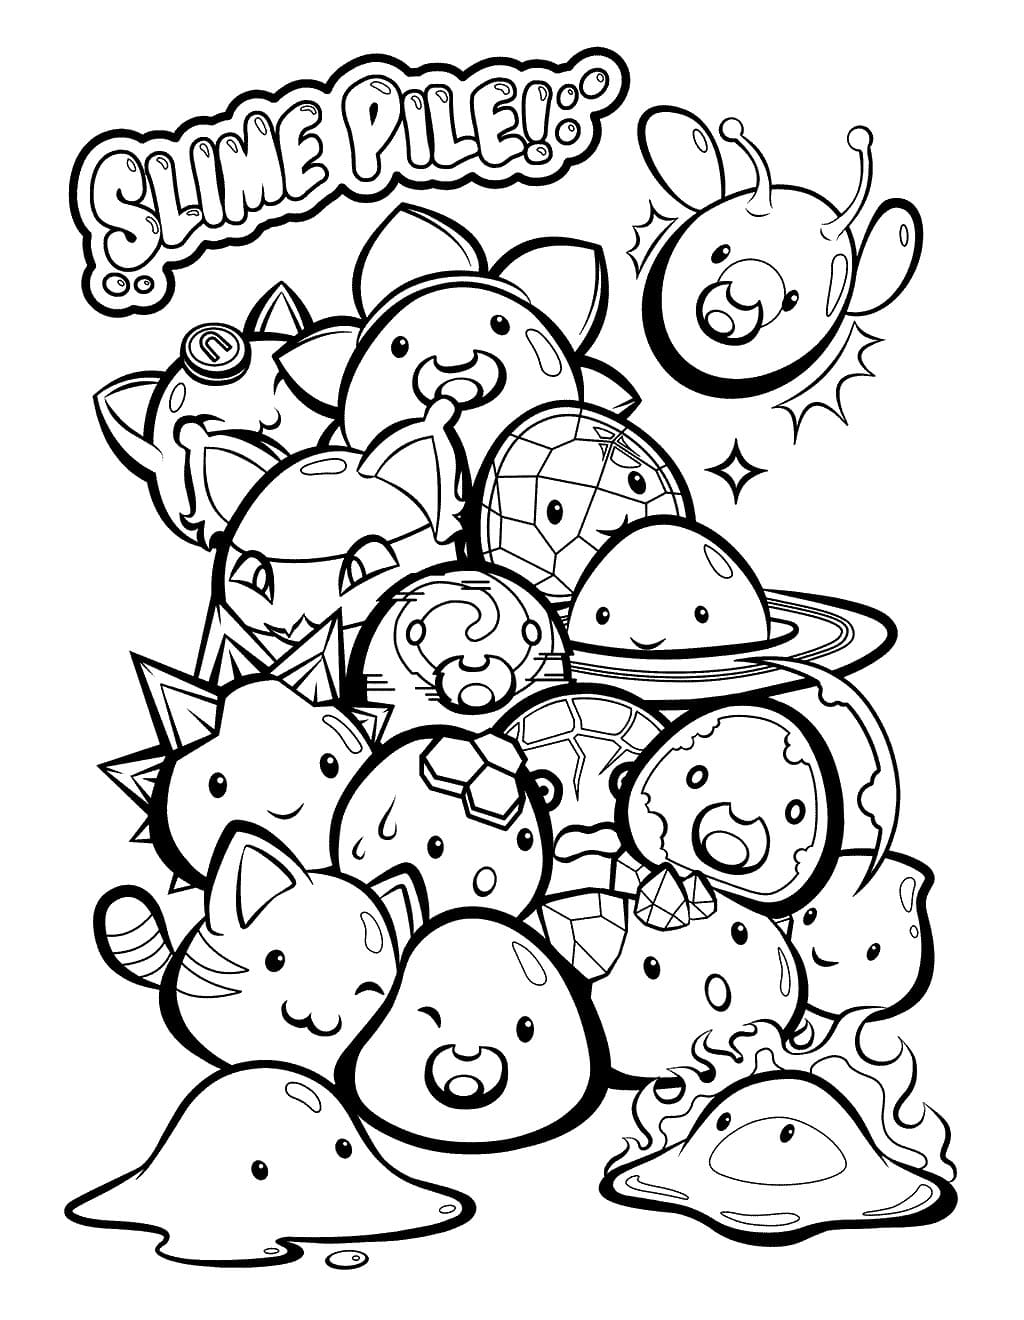 slime-coloring-pages-print-for-kids-wonder-day-coloring-pages-for